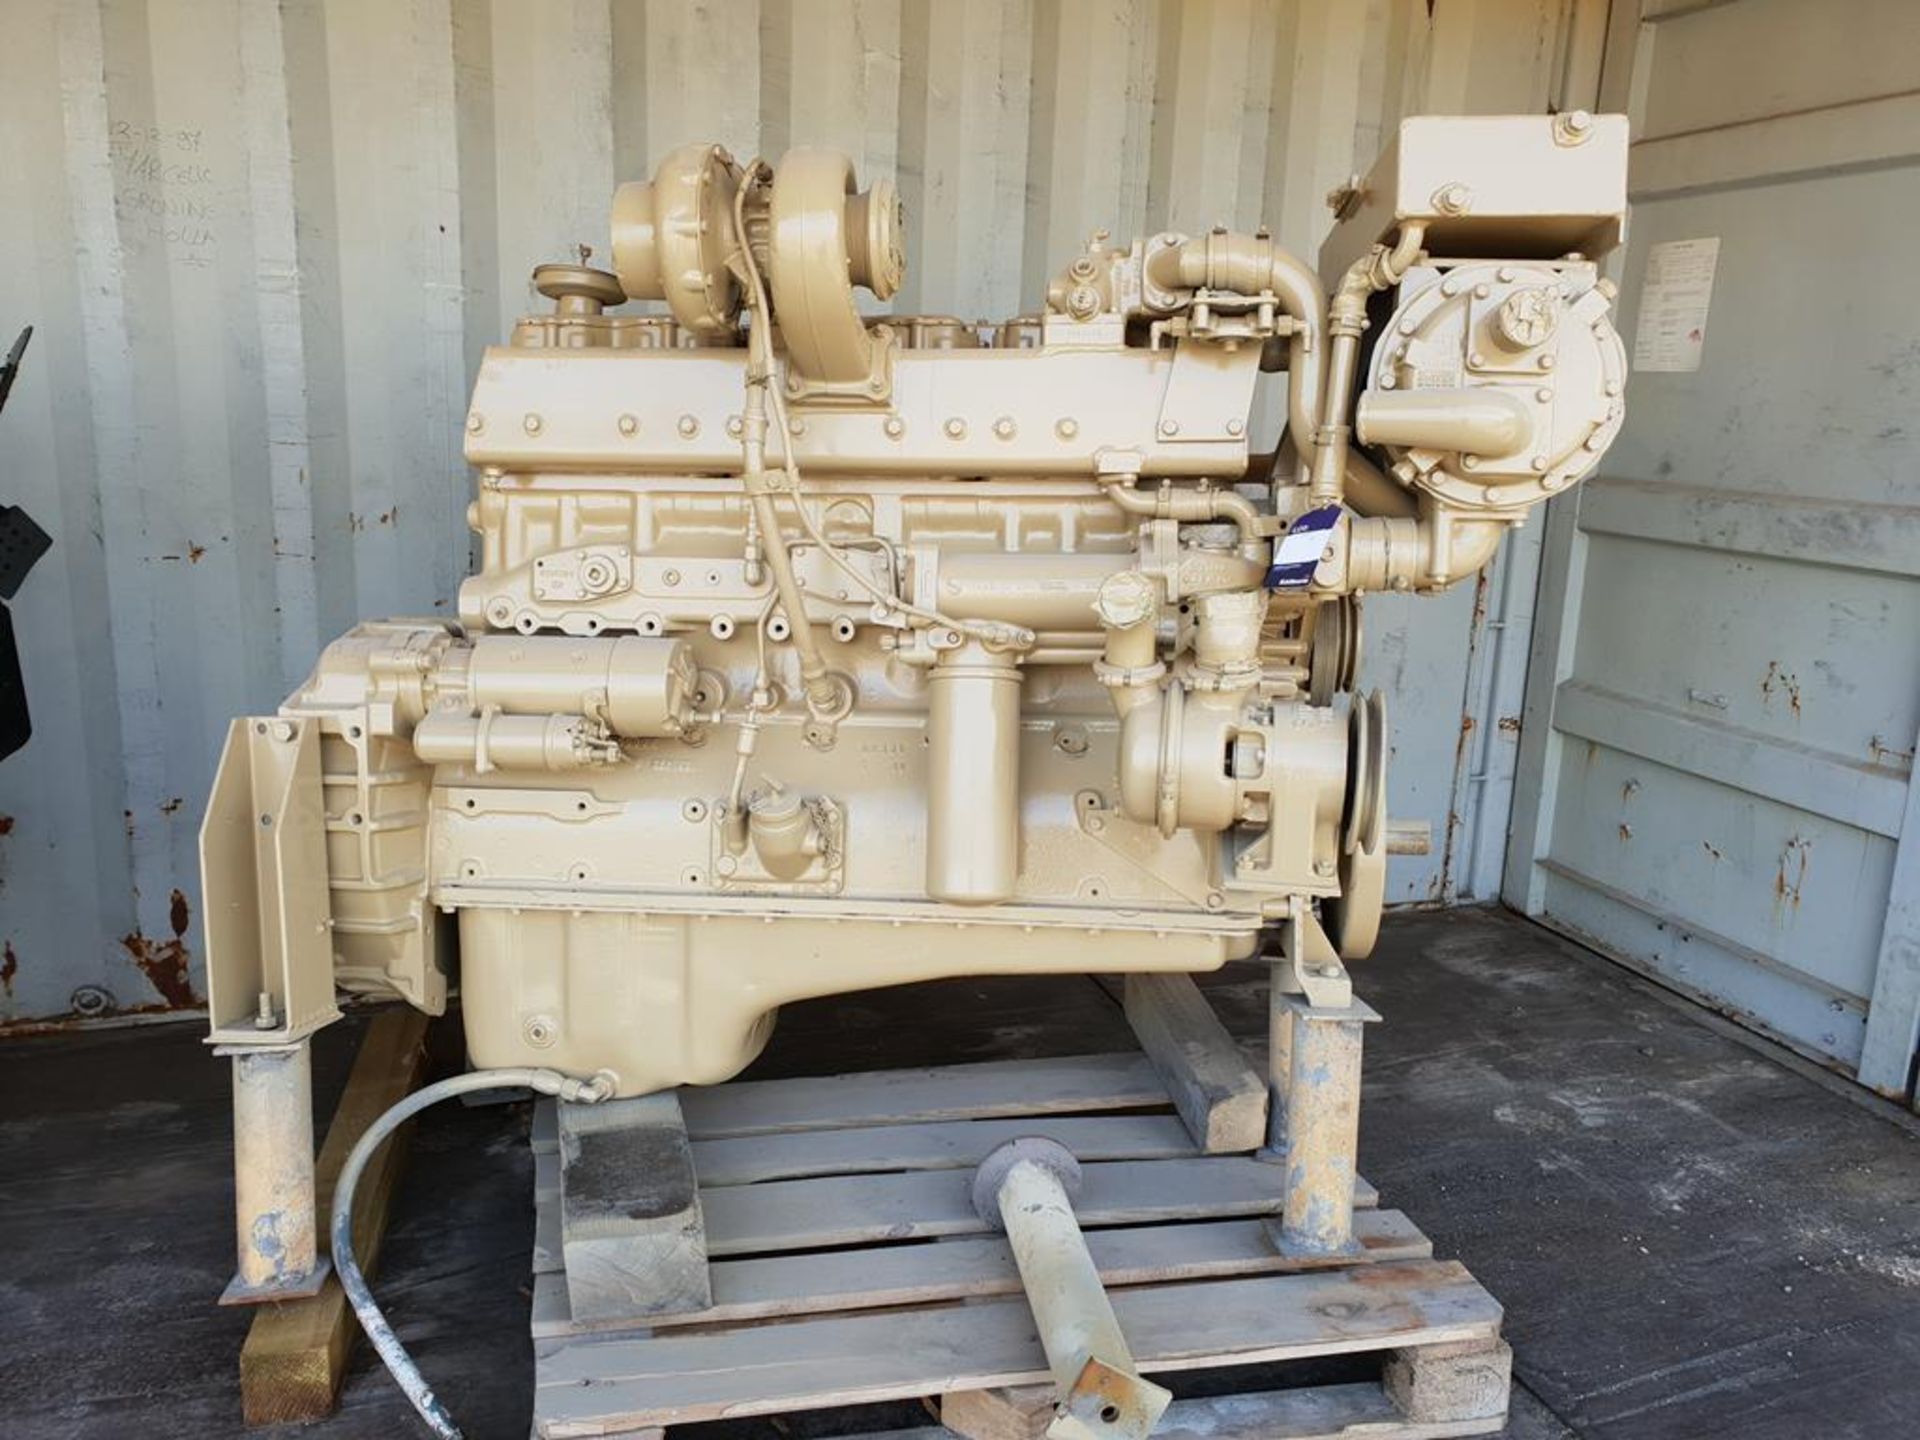 * Cummins Marine 855 Turbo Diesel Engine used. Please note this lot is located at Manby Airfield